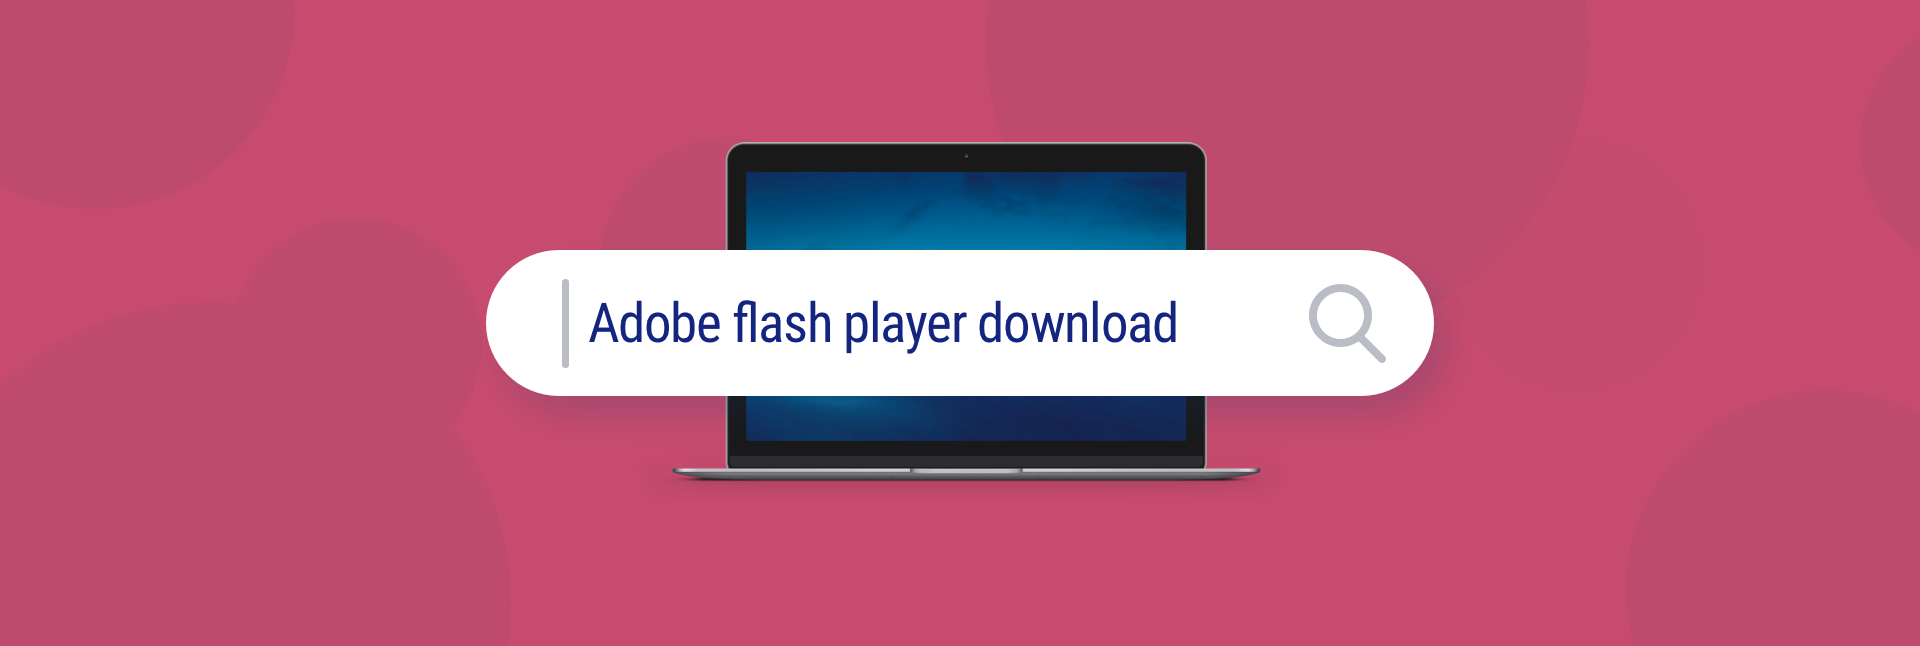 how to update adobe flash player on google chrome for mac